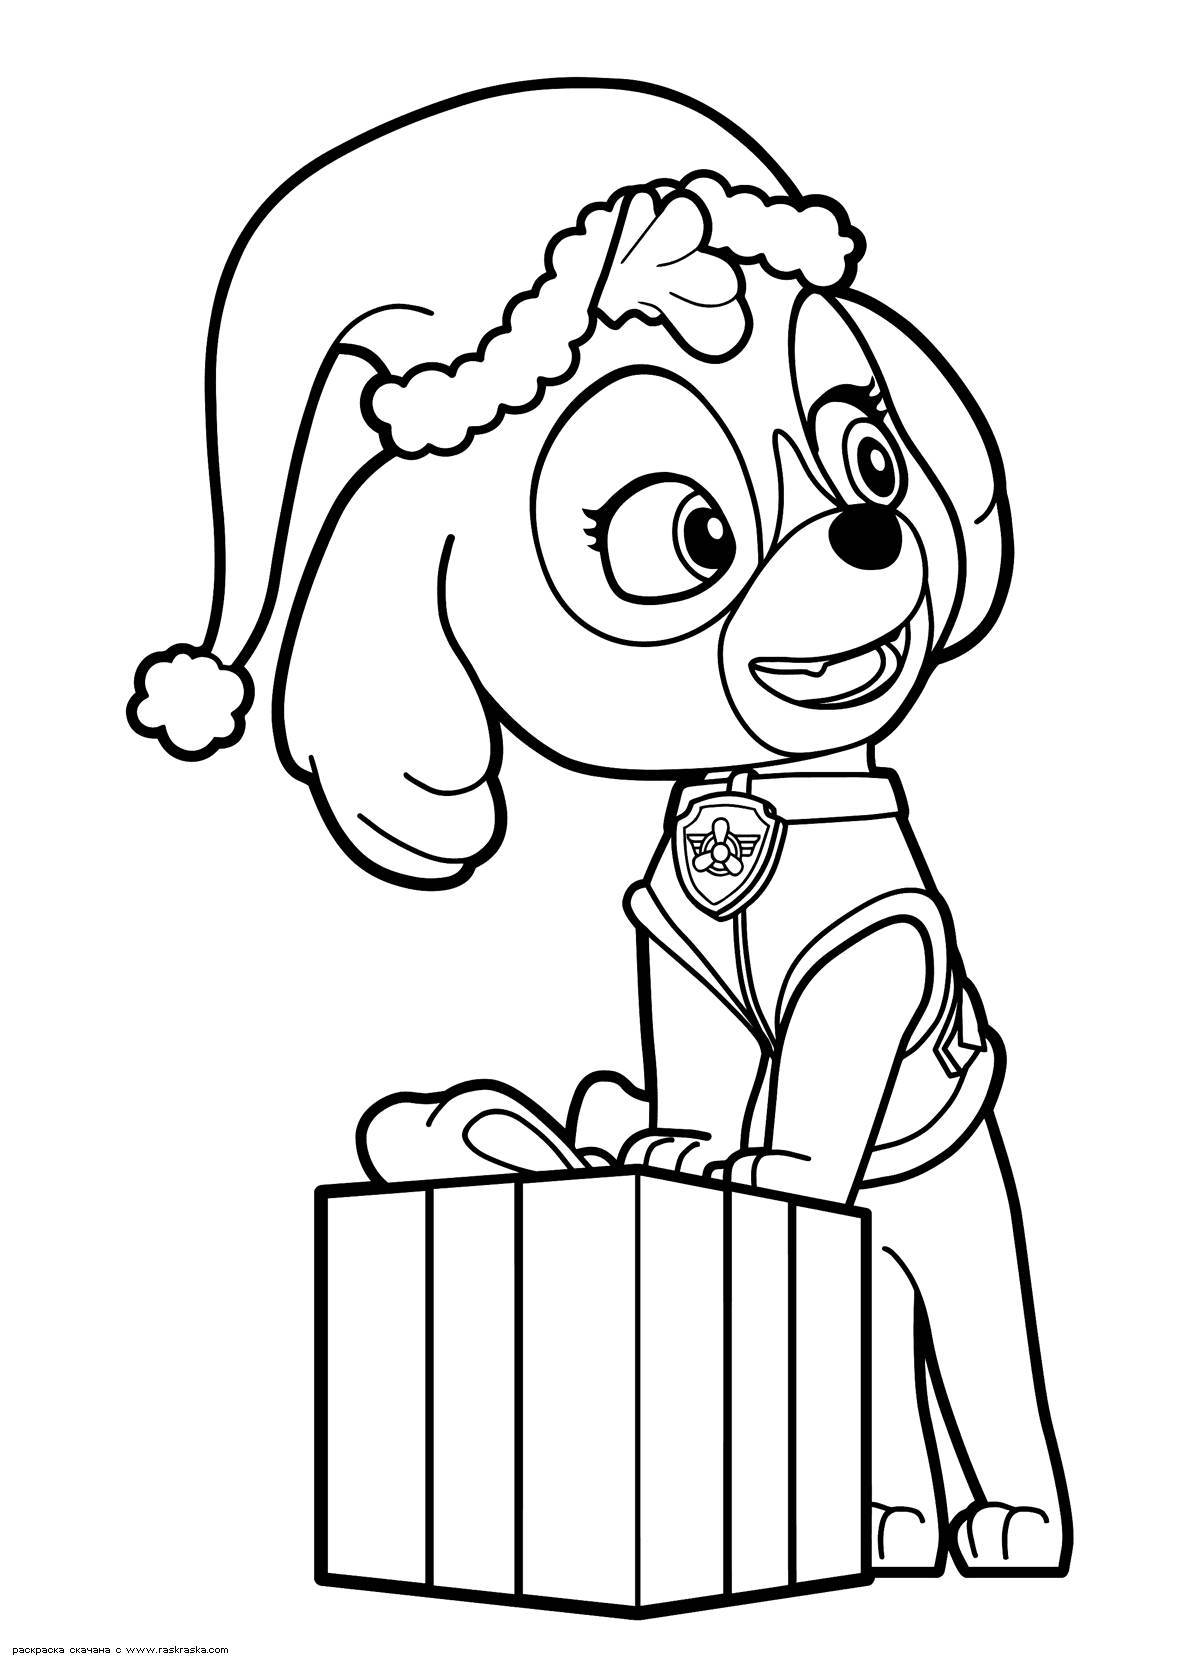 Dazzling sky paw patrol coloring page